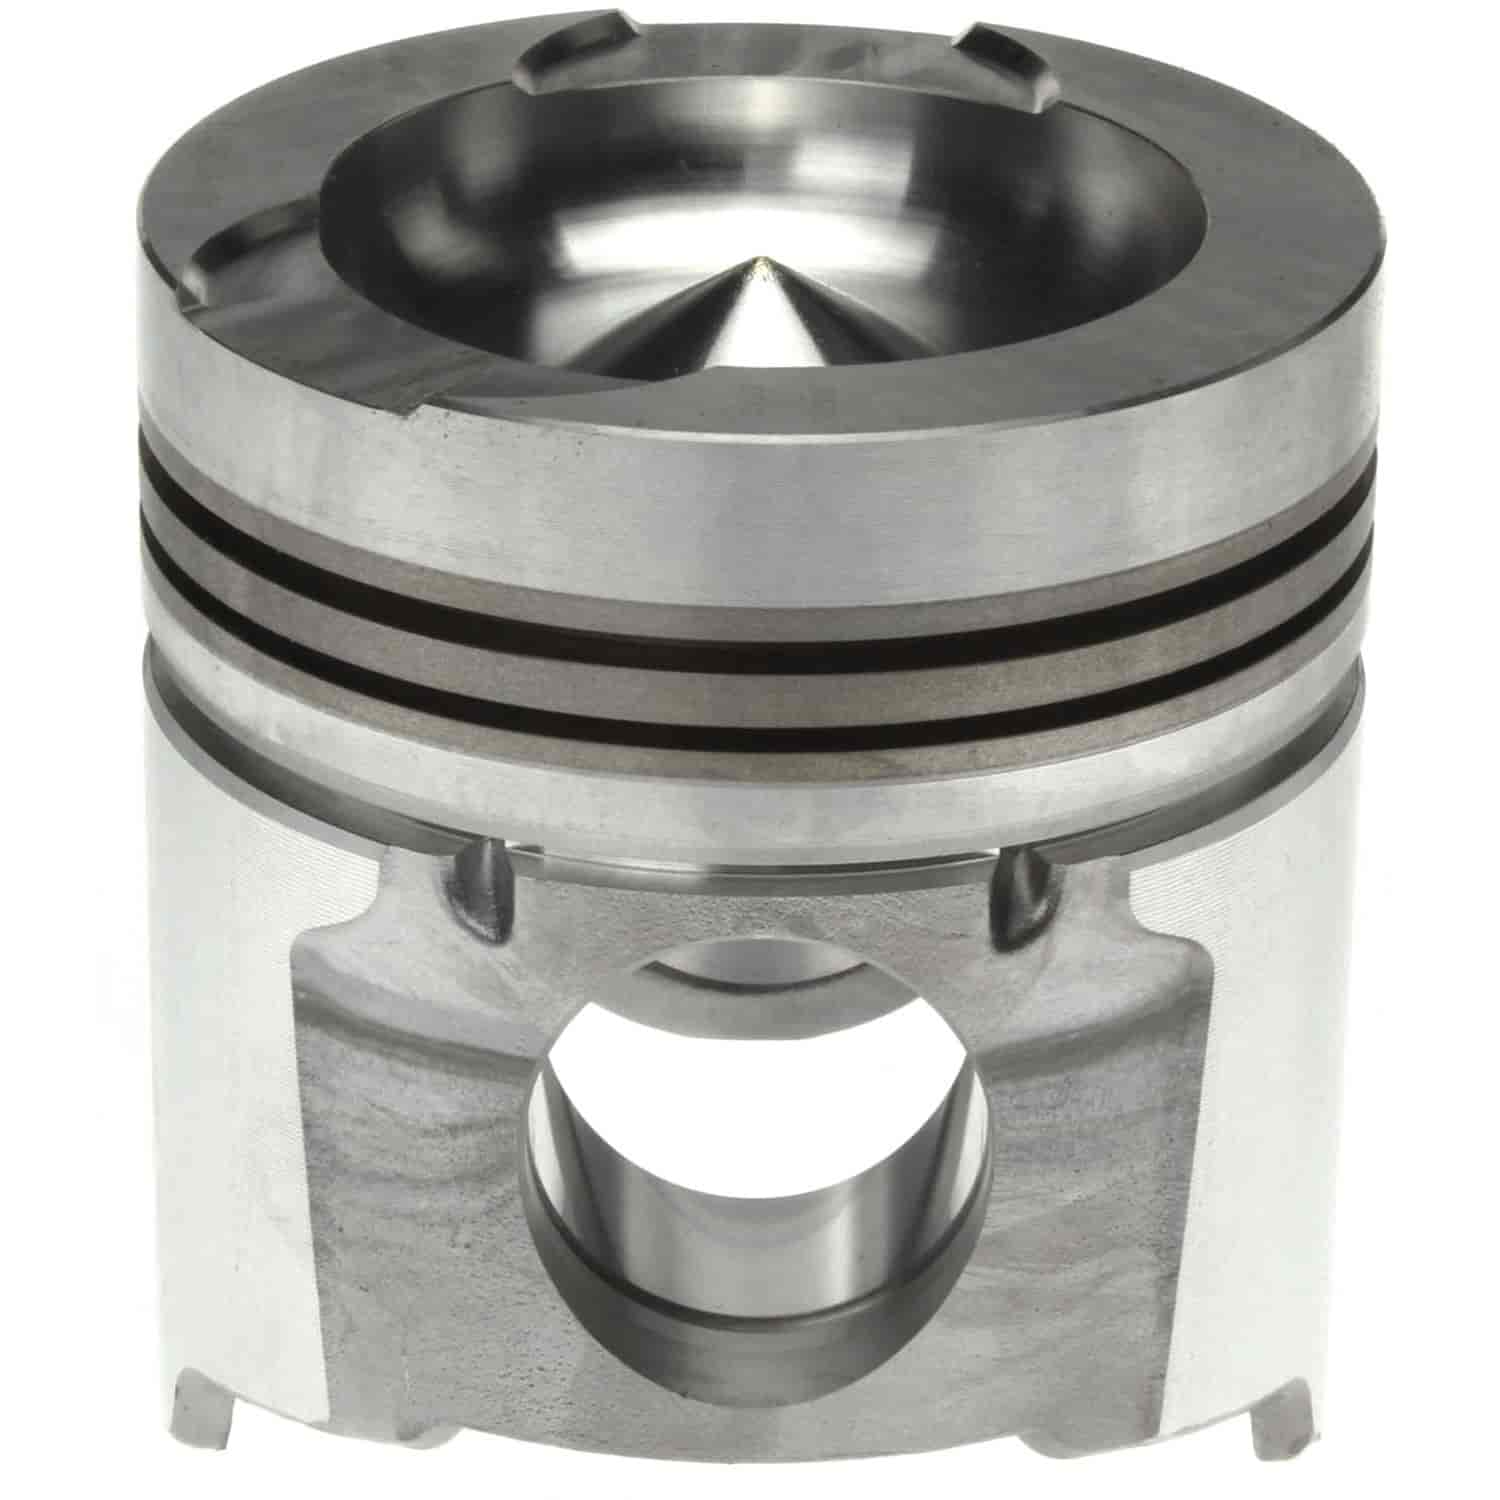 Piston Without Piston Pin CAT 3300 SERIES 4-3/4 IN. BORE 4-6 CYL